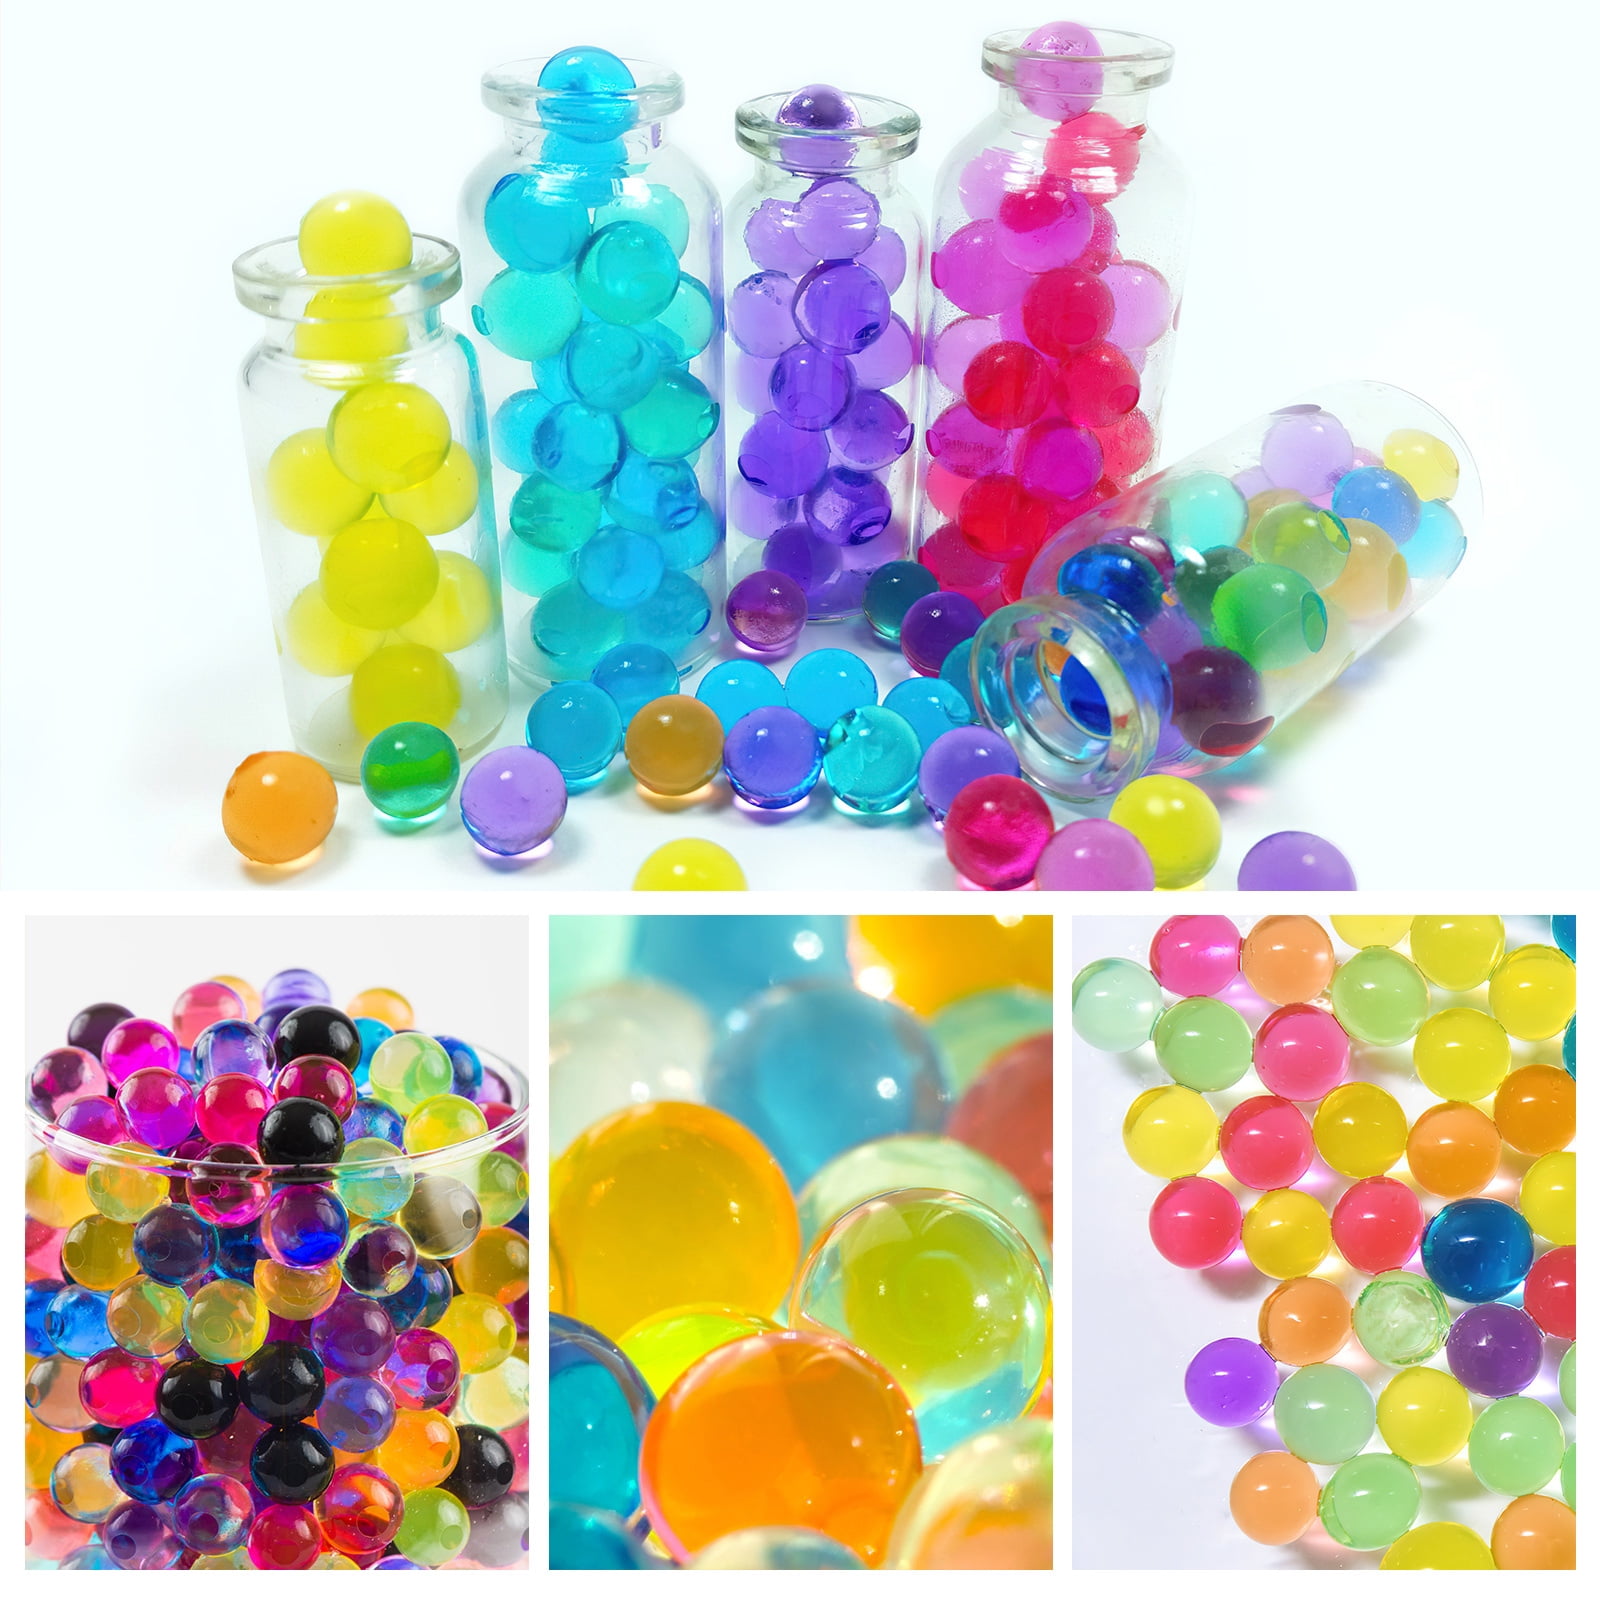  MAGICLUB 100,000 Clear Water Gel Beads,Transparent Water Gel  Beads for vase Filler Beads,Non Toxic Water Beads for Soilless Planting,  Wedding Centerpiece Floral Arrangement,Planting,Candles(Clear) : Home &  Kitchen